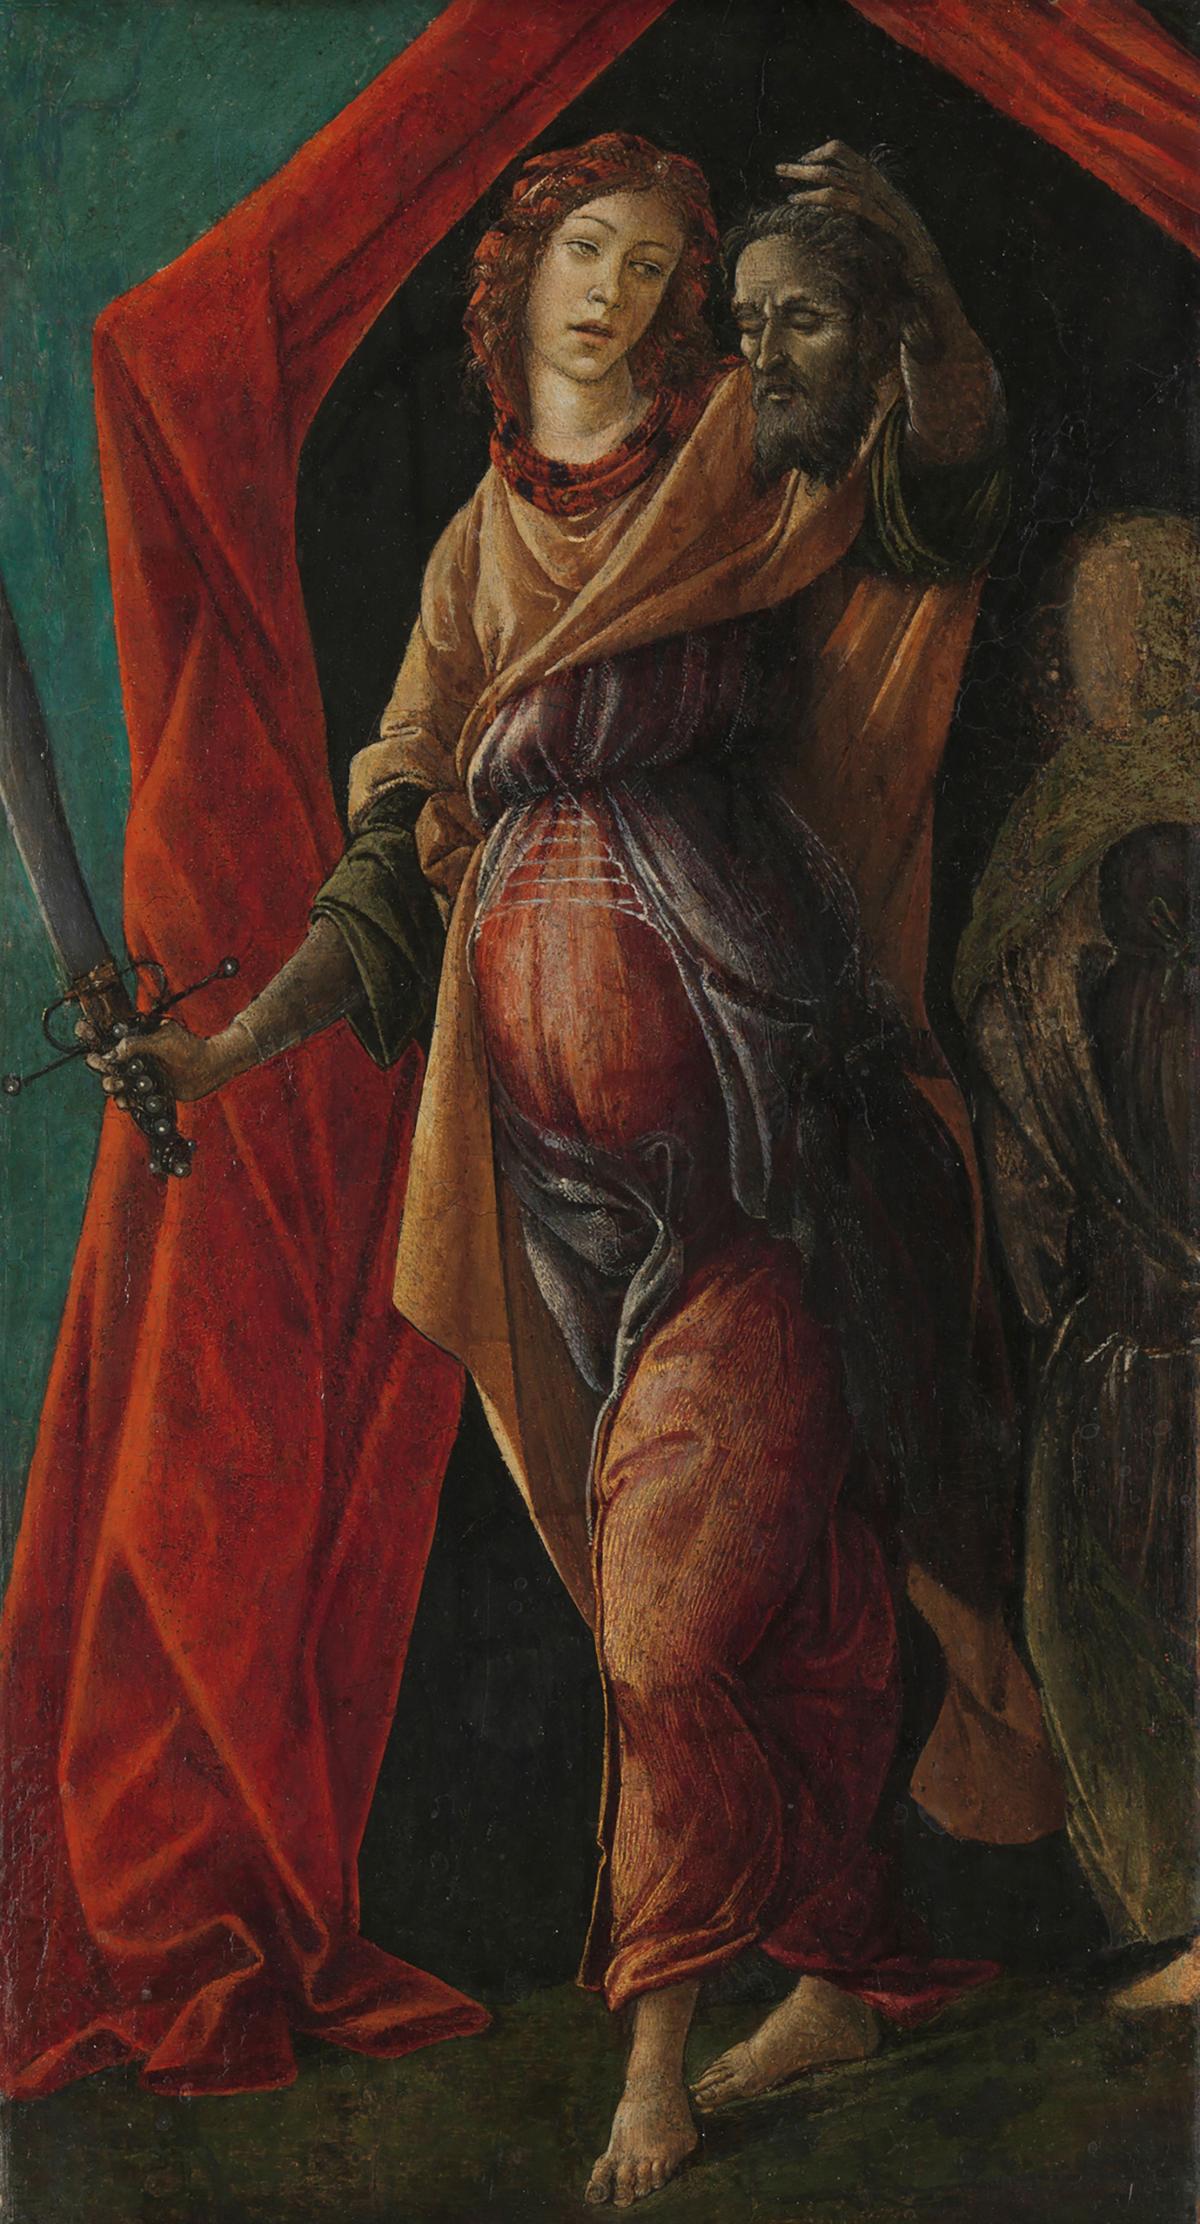 “Judith with the Head of Holofernes,” circa 1497–1500, by Sandro Botticelli. Tempera and oil on panel; 14 3/8 inches by 7 7/8 inches by 2 3/4 inches. Rijksmuseum, Amsterdam. (Courtesy of Legion of Honor)